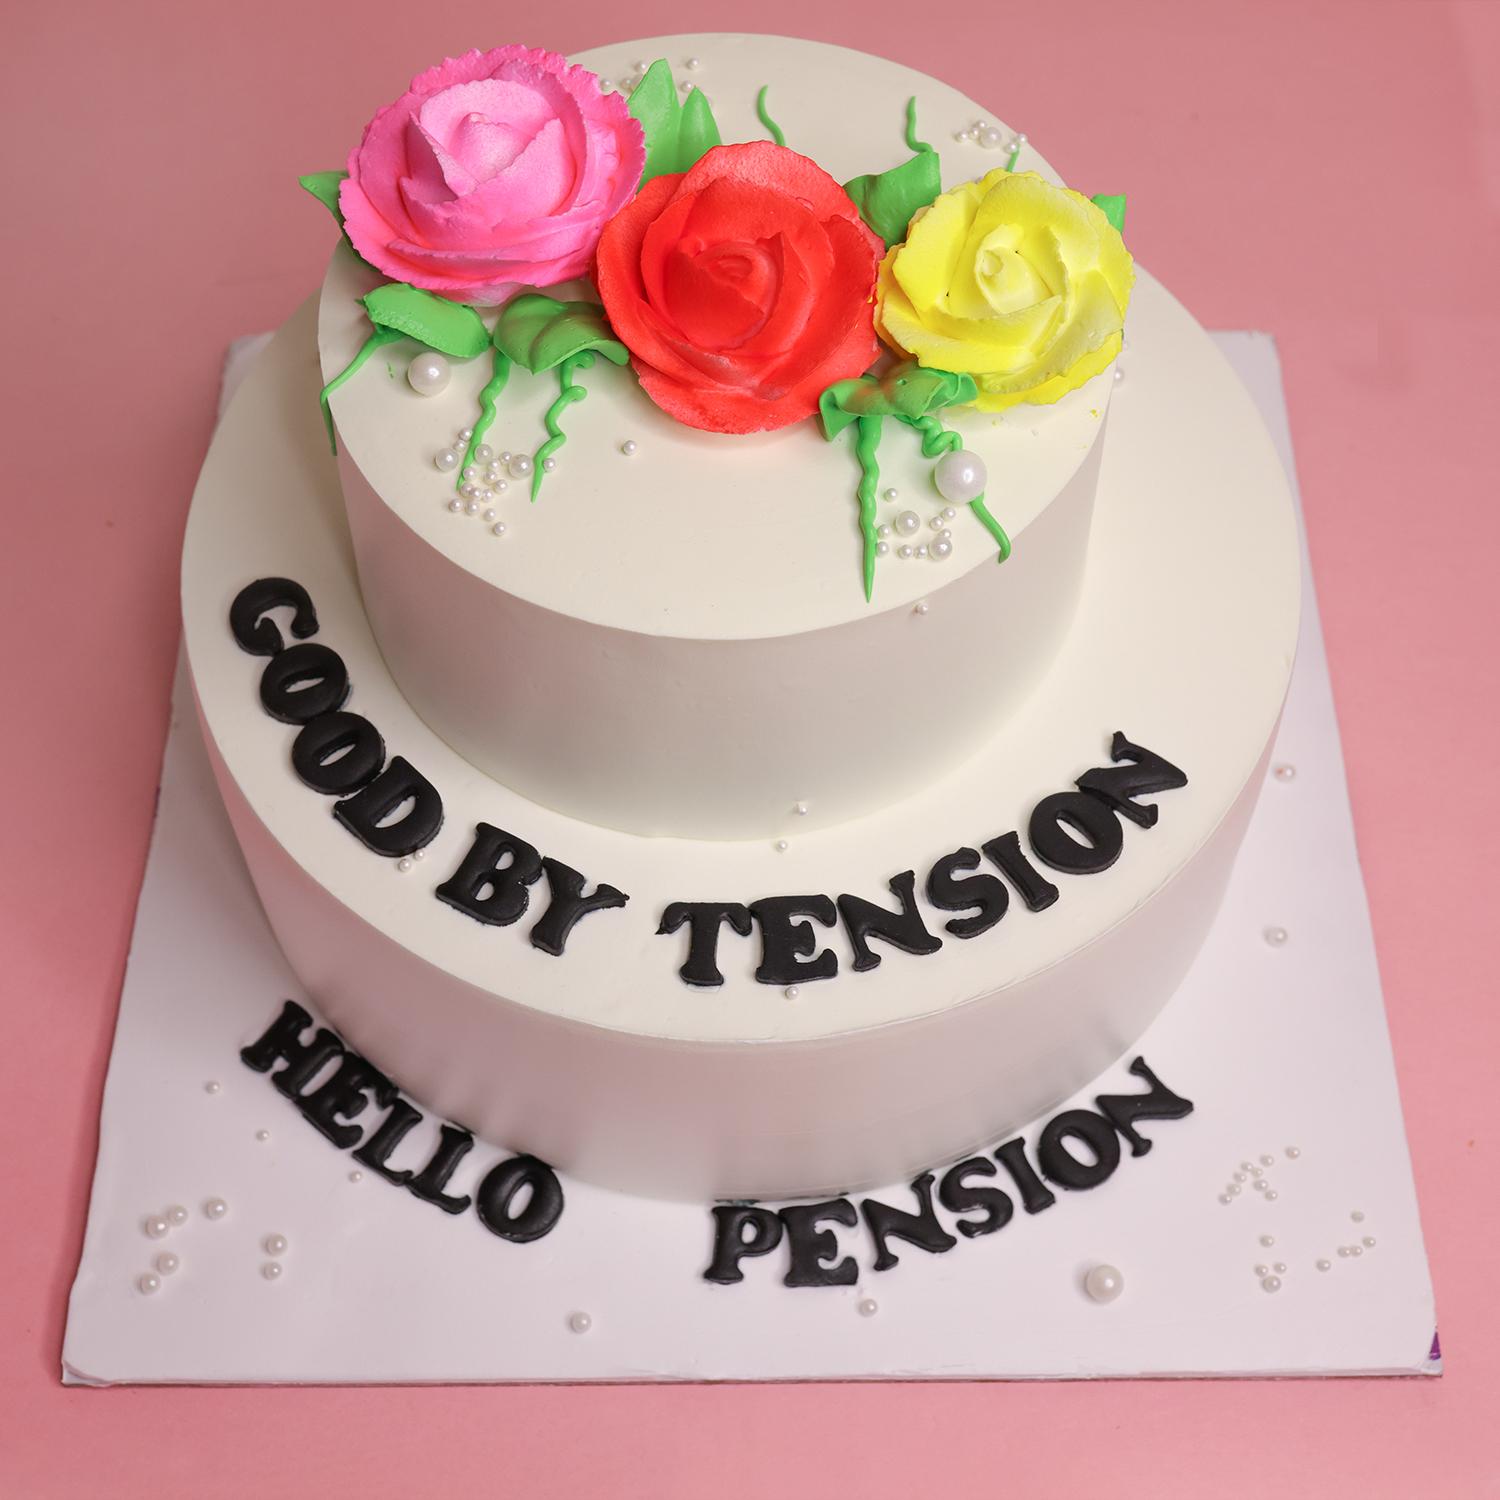 Retirement Cake Sayings: Top 100+ Funny Things To Write